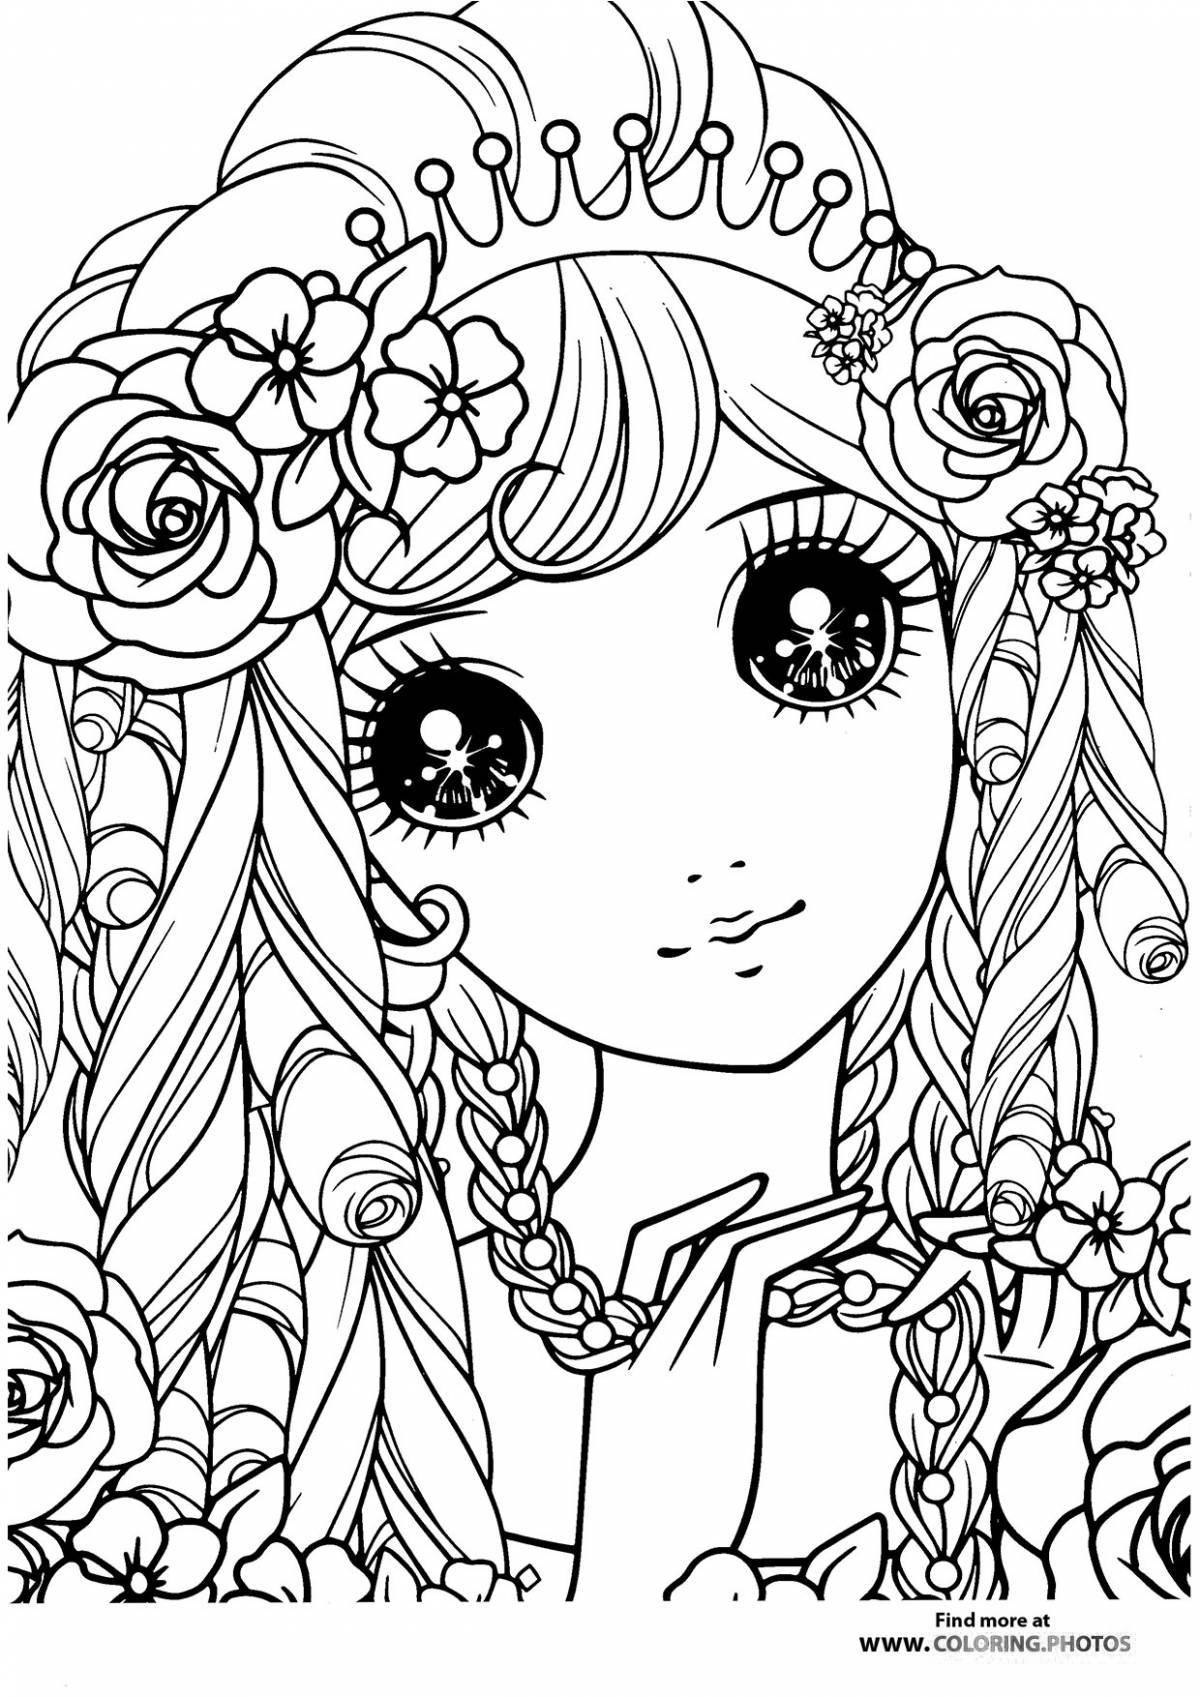 Charming coloring book for girls 11 years old cute